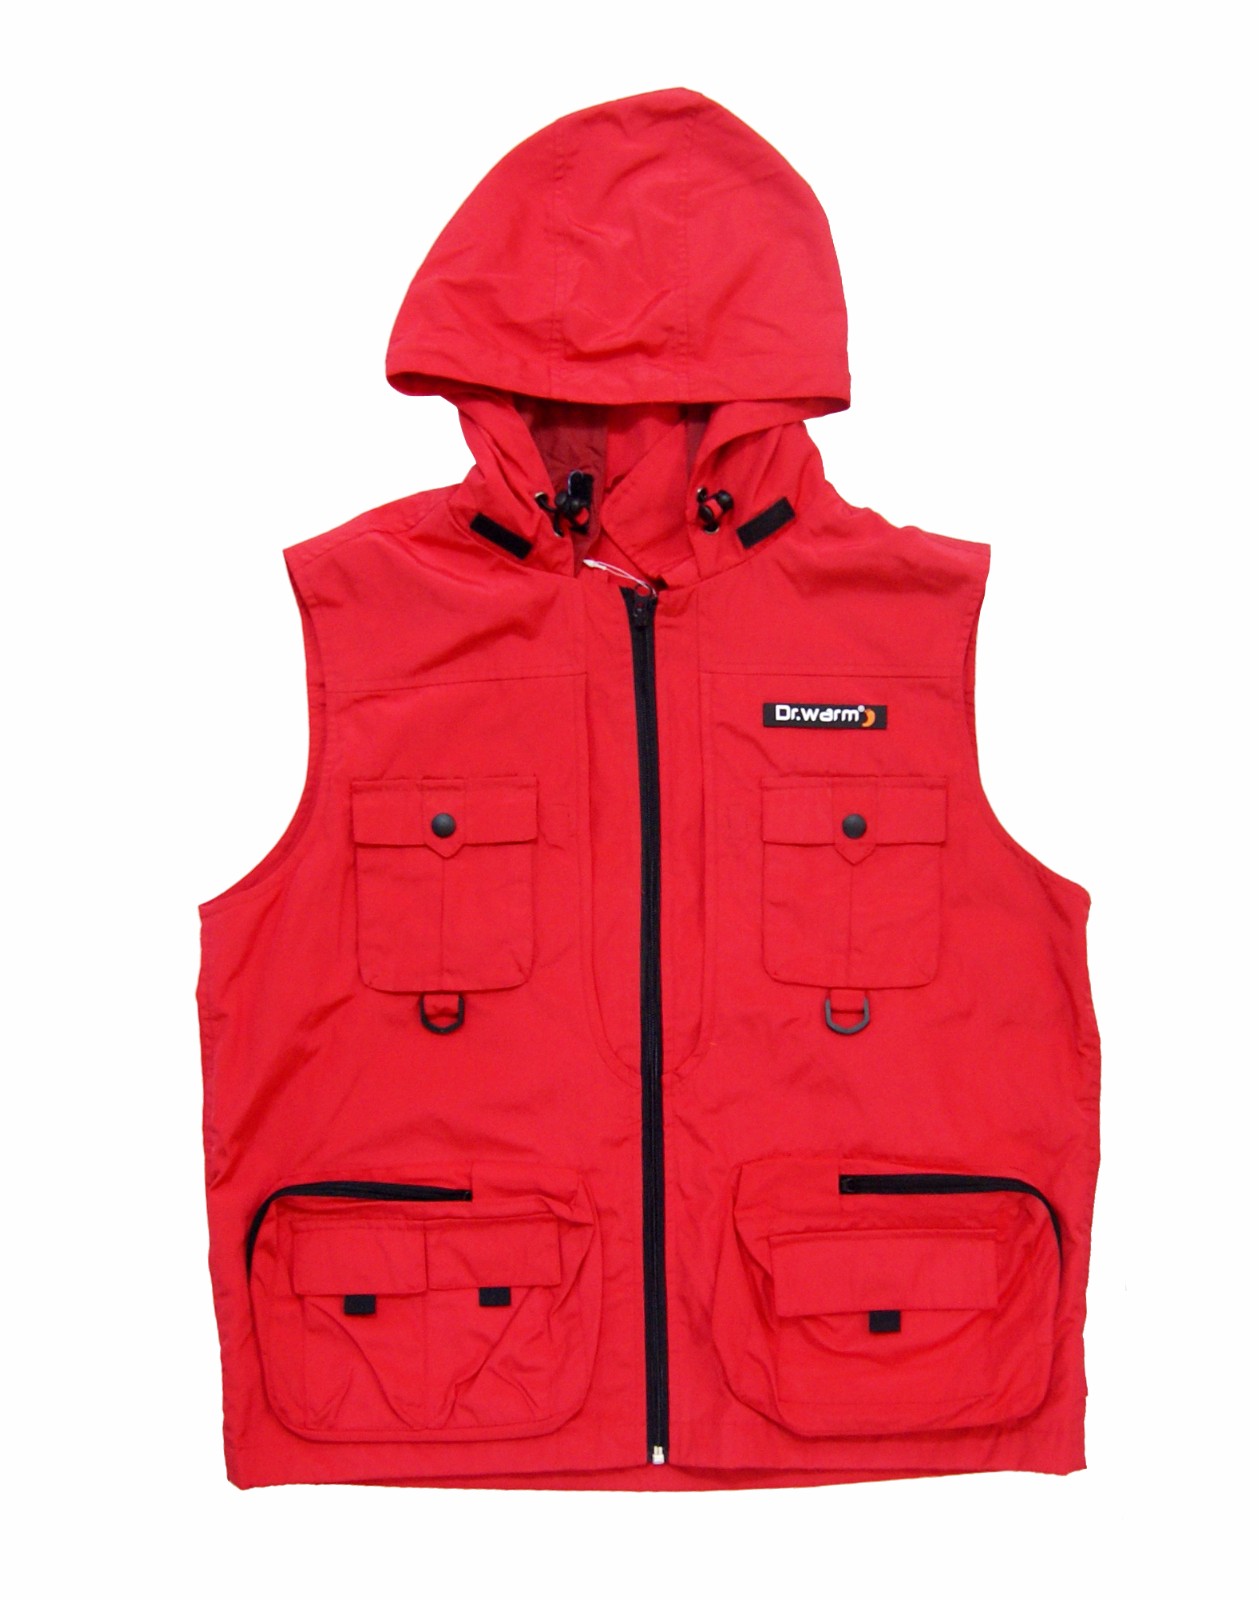 Dr. Warm area best heated vest improves blood circulation for winter-7